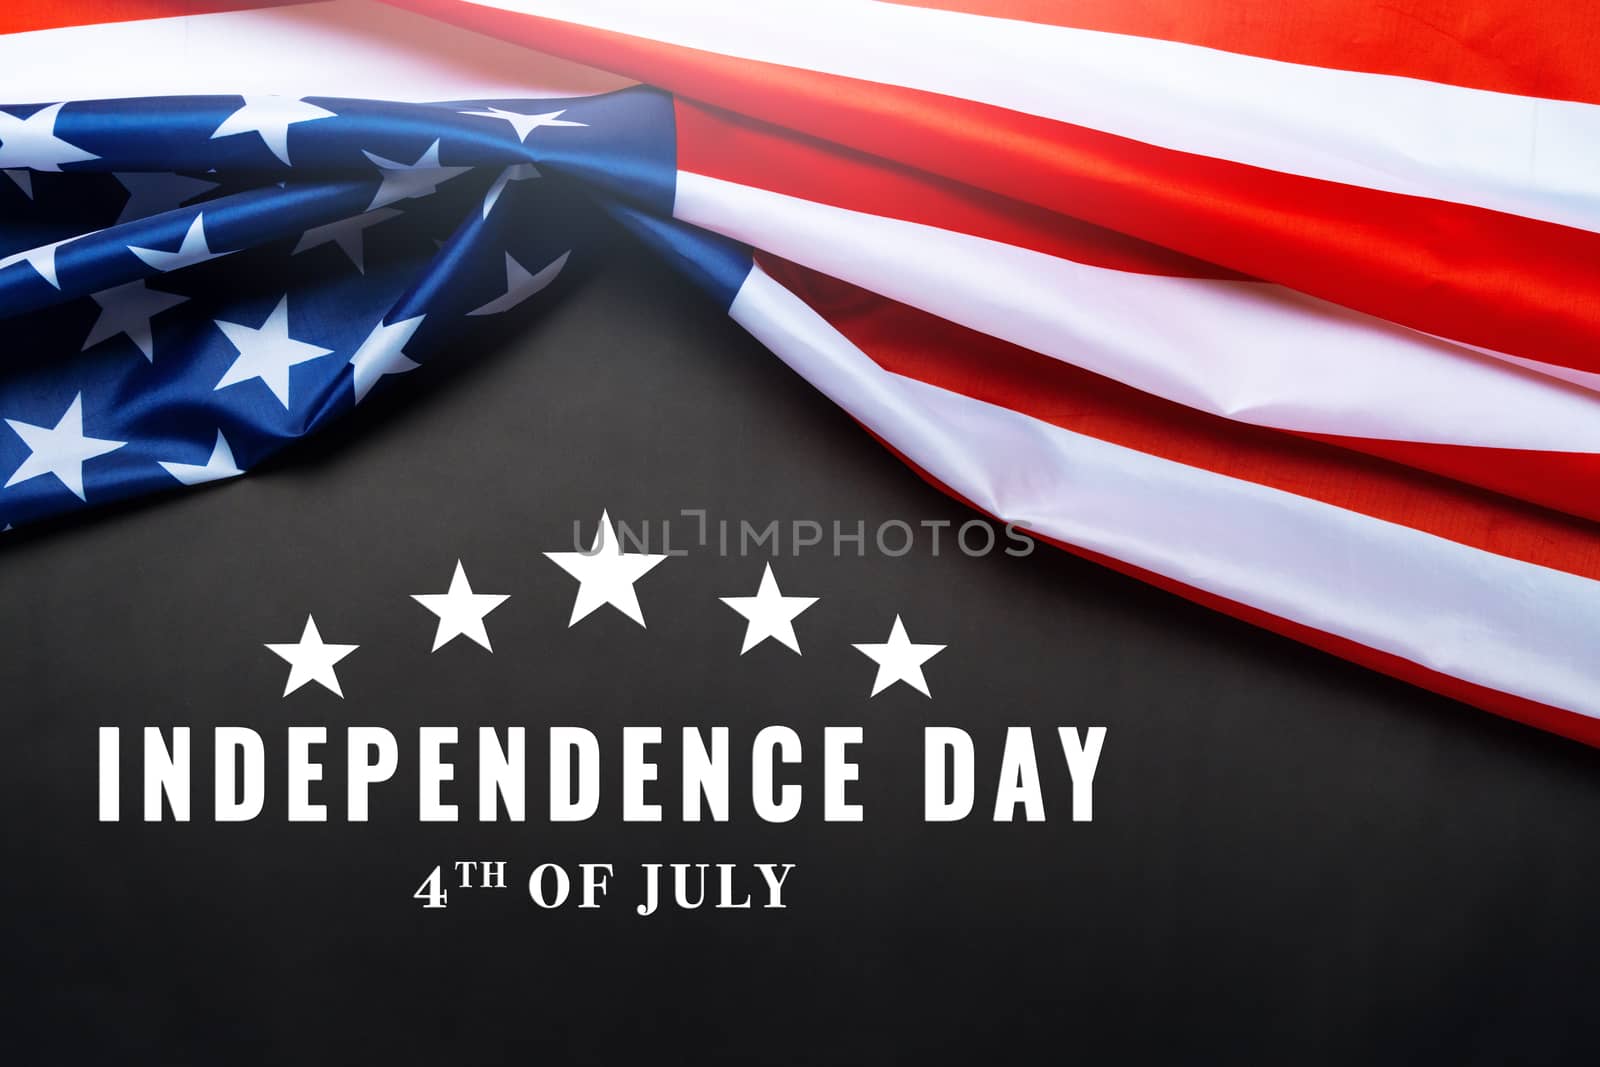 USA Independence day 4th of July concept, United States of America flag